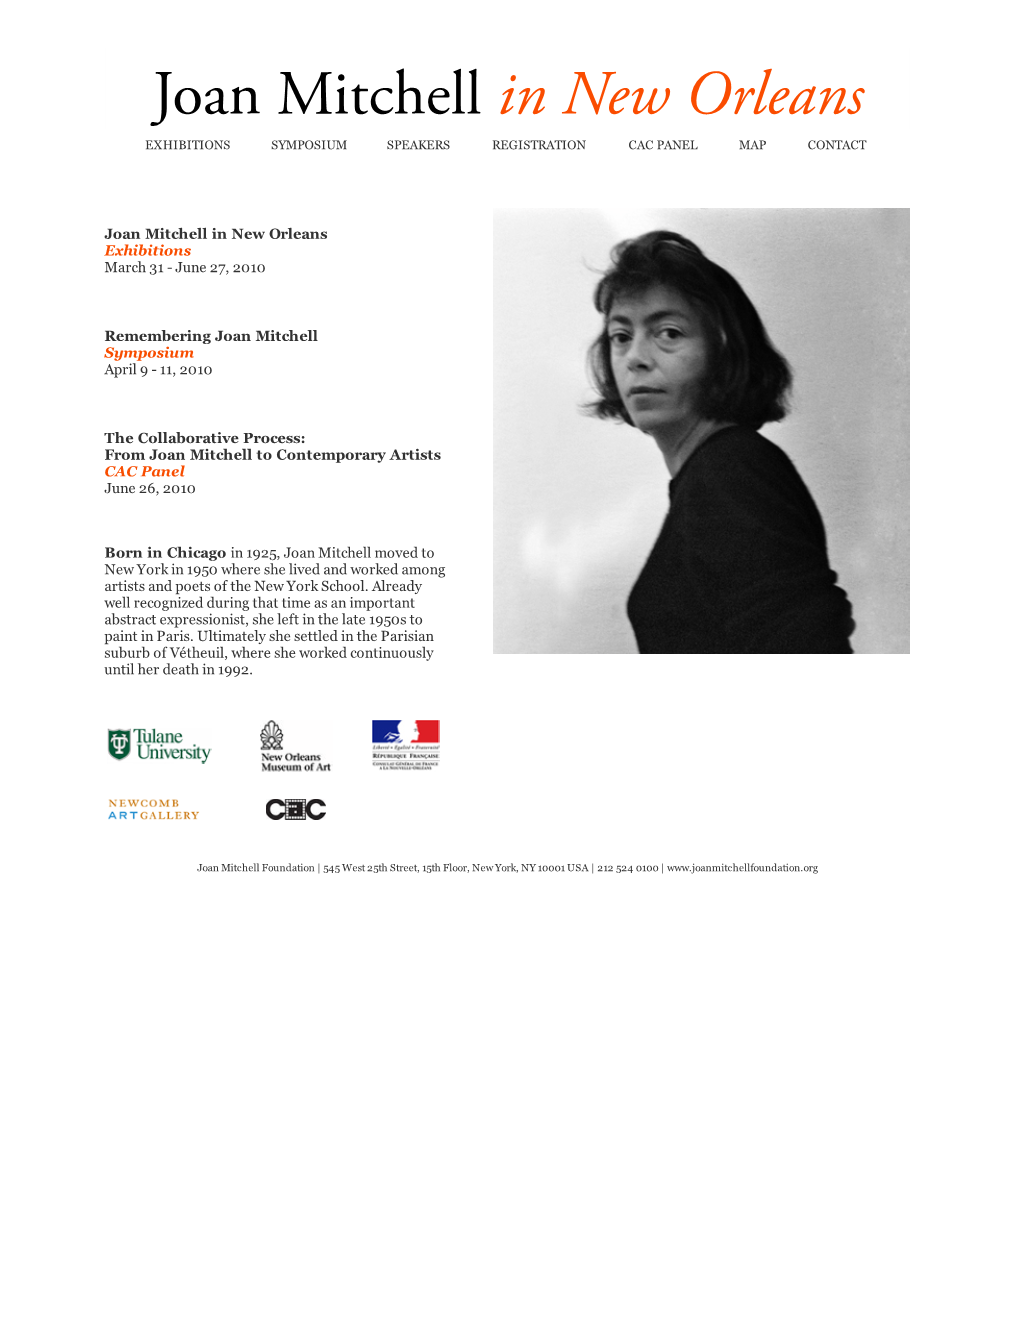 Joan Mitchell in New Orleans EXHIBITIONS SYMPOSIUM SPEAKERS REGISTRATION CAC PANEL MAP CONTACT